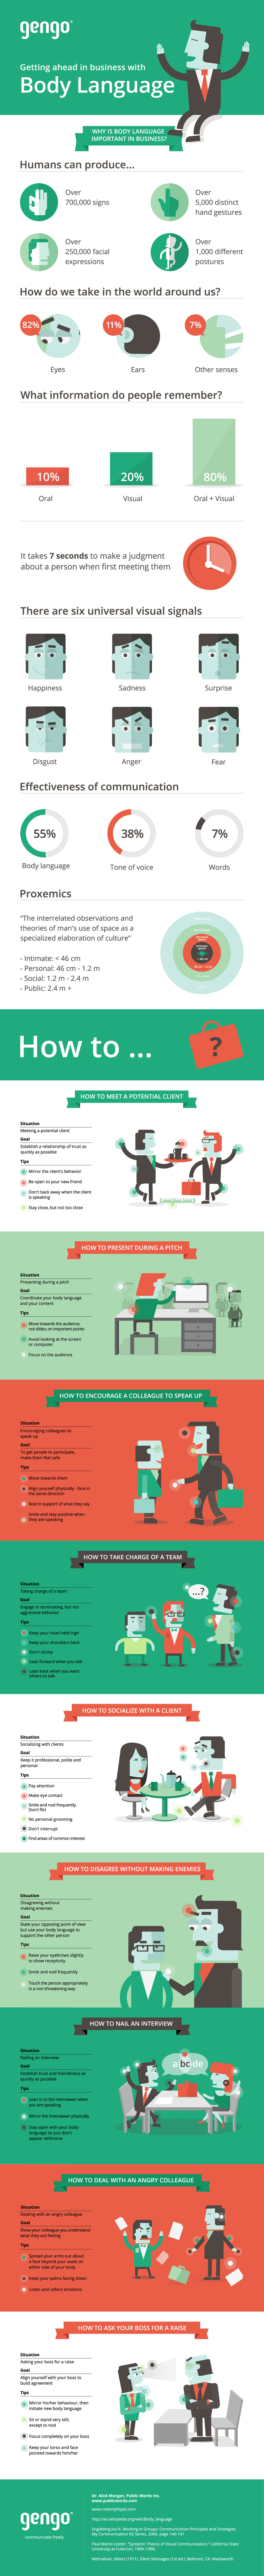 Info-graphic about body language in business